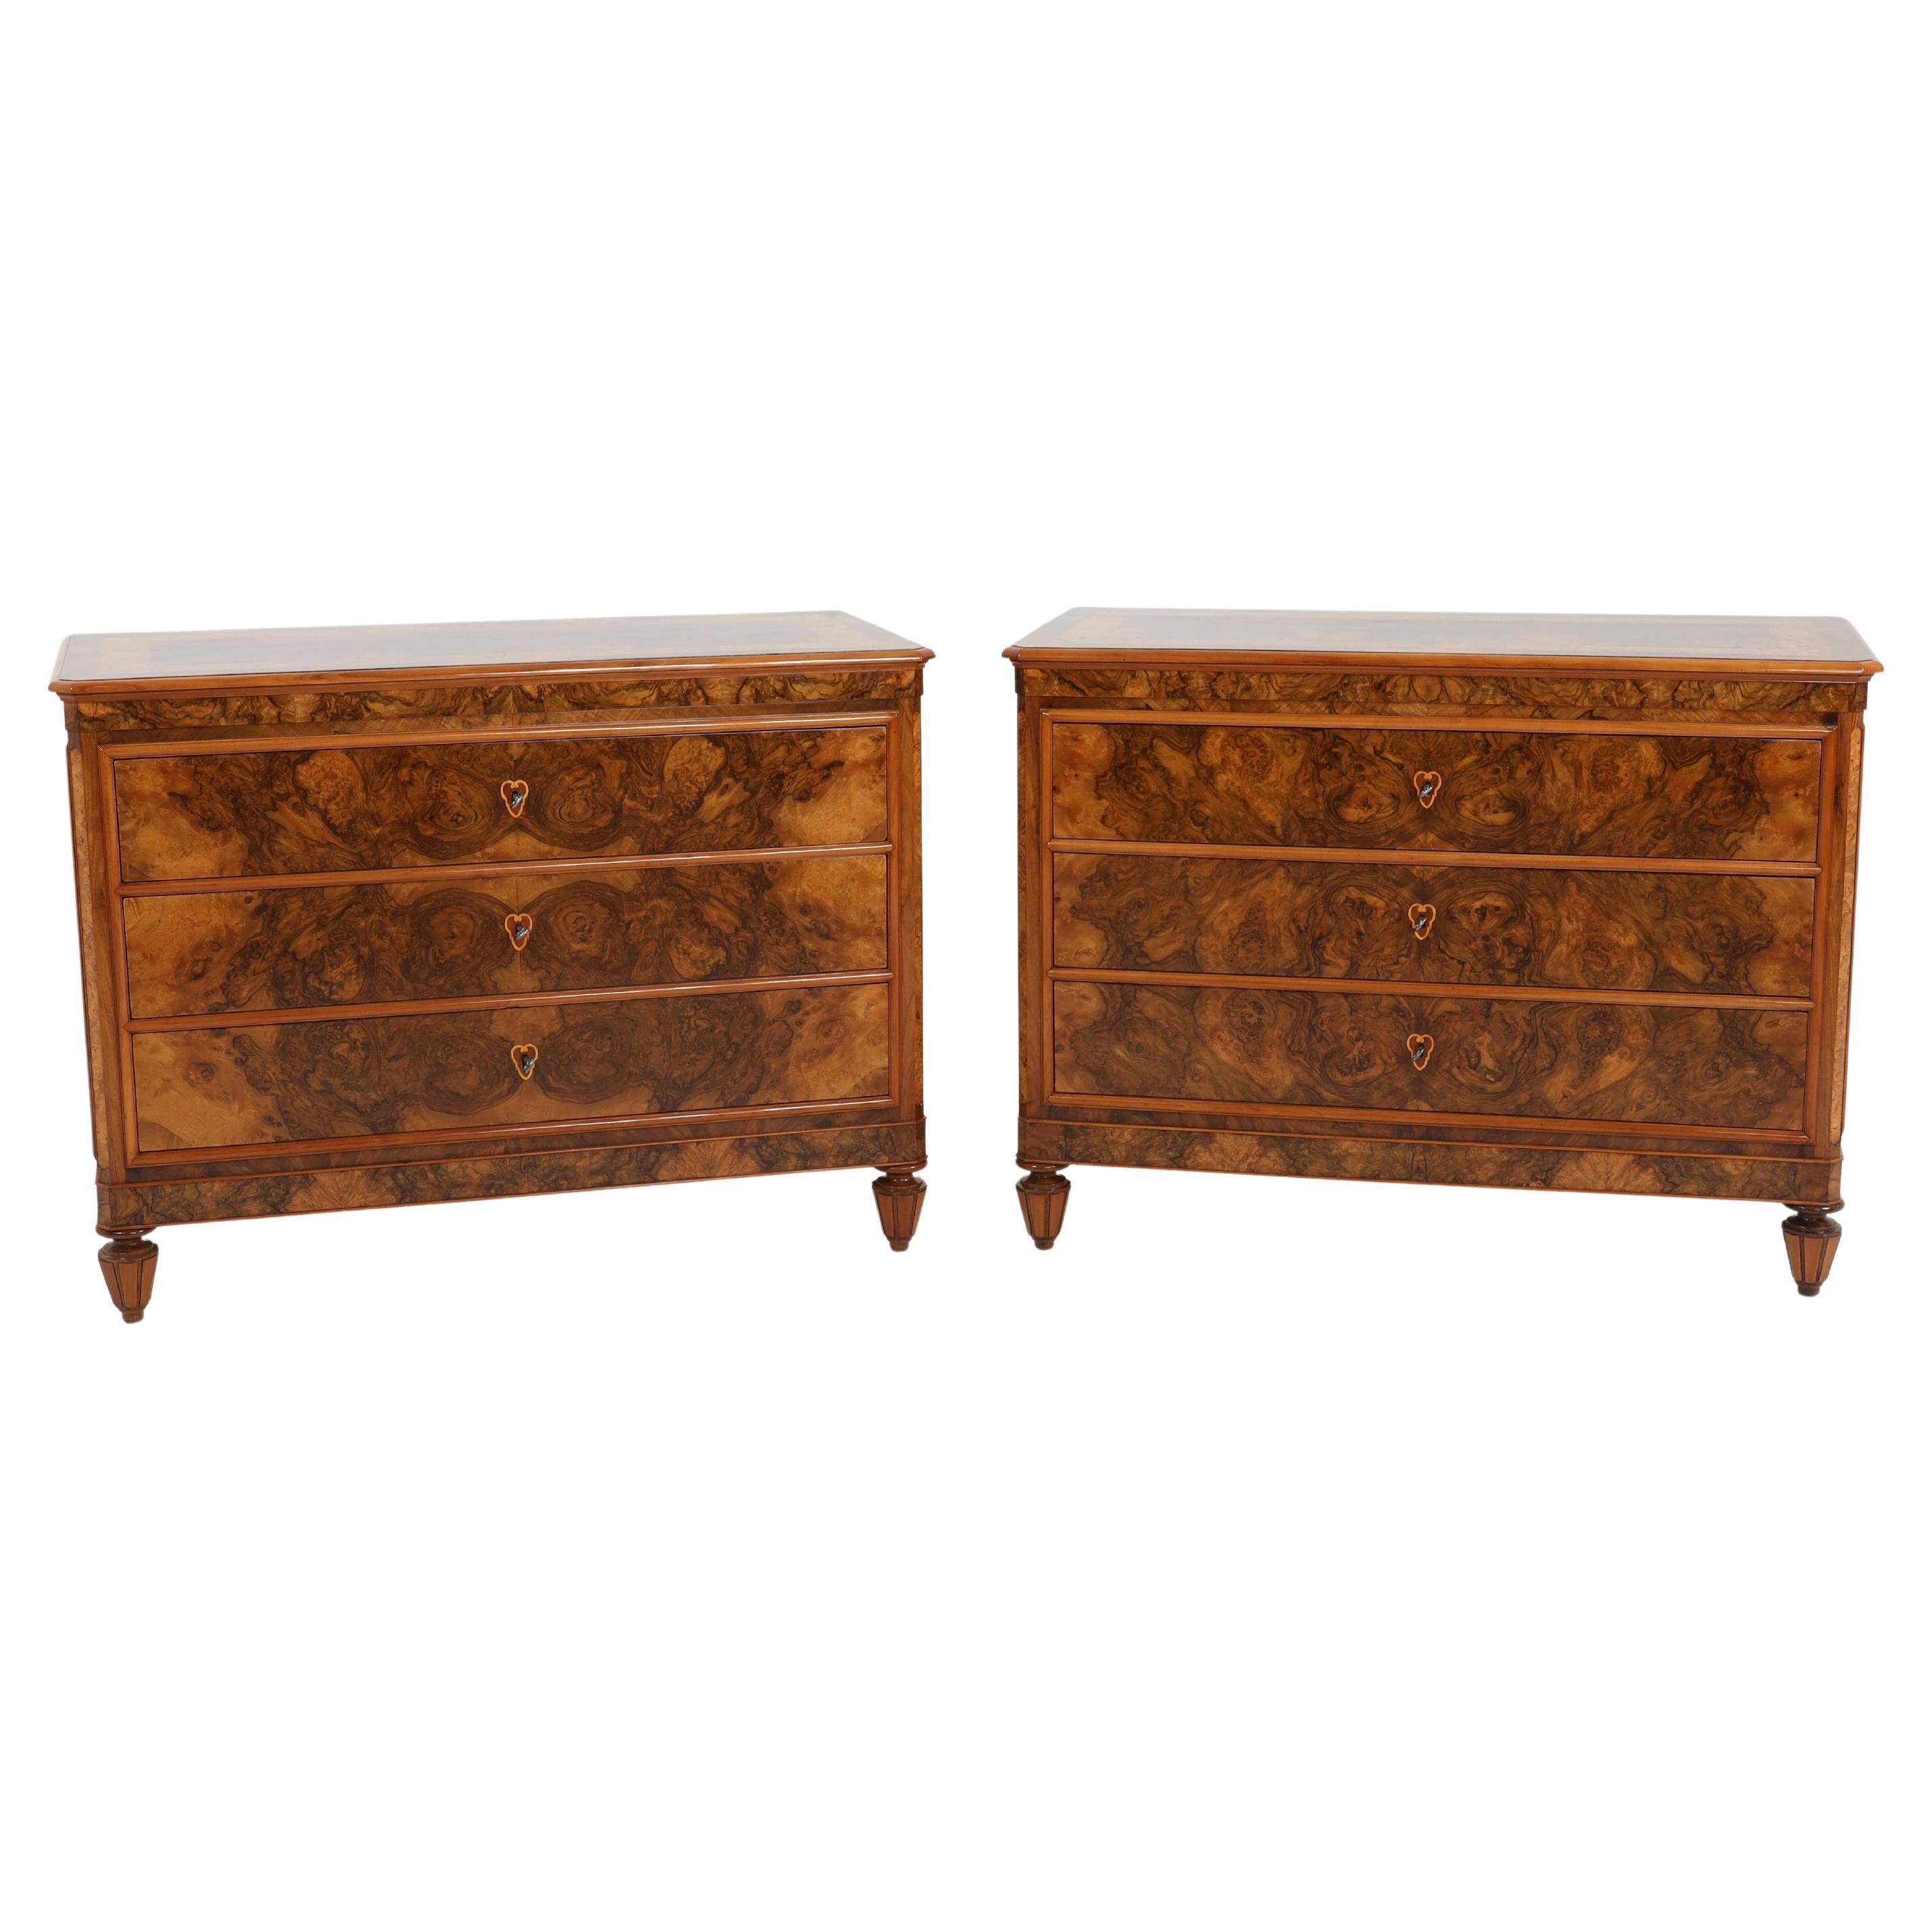 Pair of Chests of Drawers, Italy, Around 1835